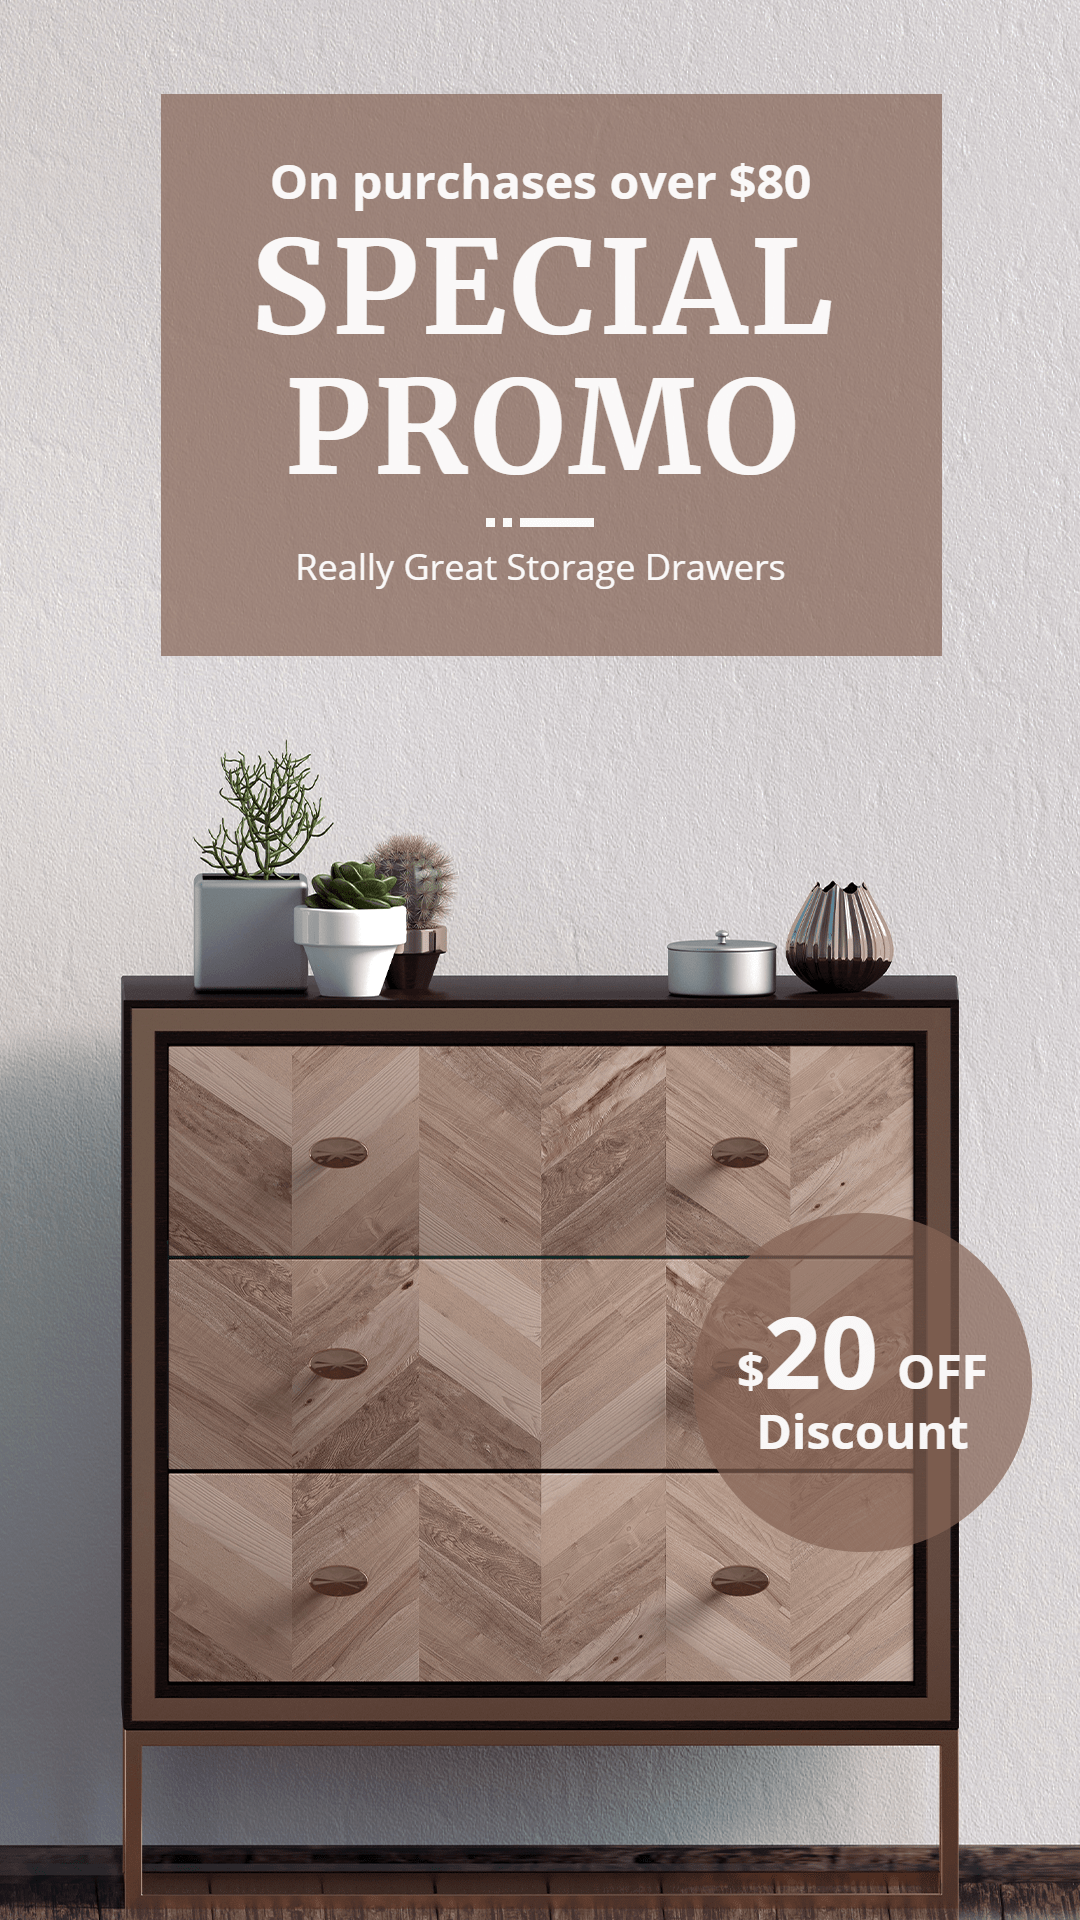 Cabinet Display Storage & Organization Products Sale Promo Ecommerce Story预览效果